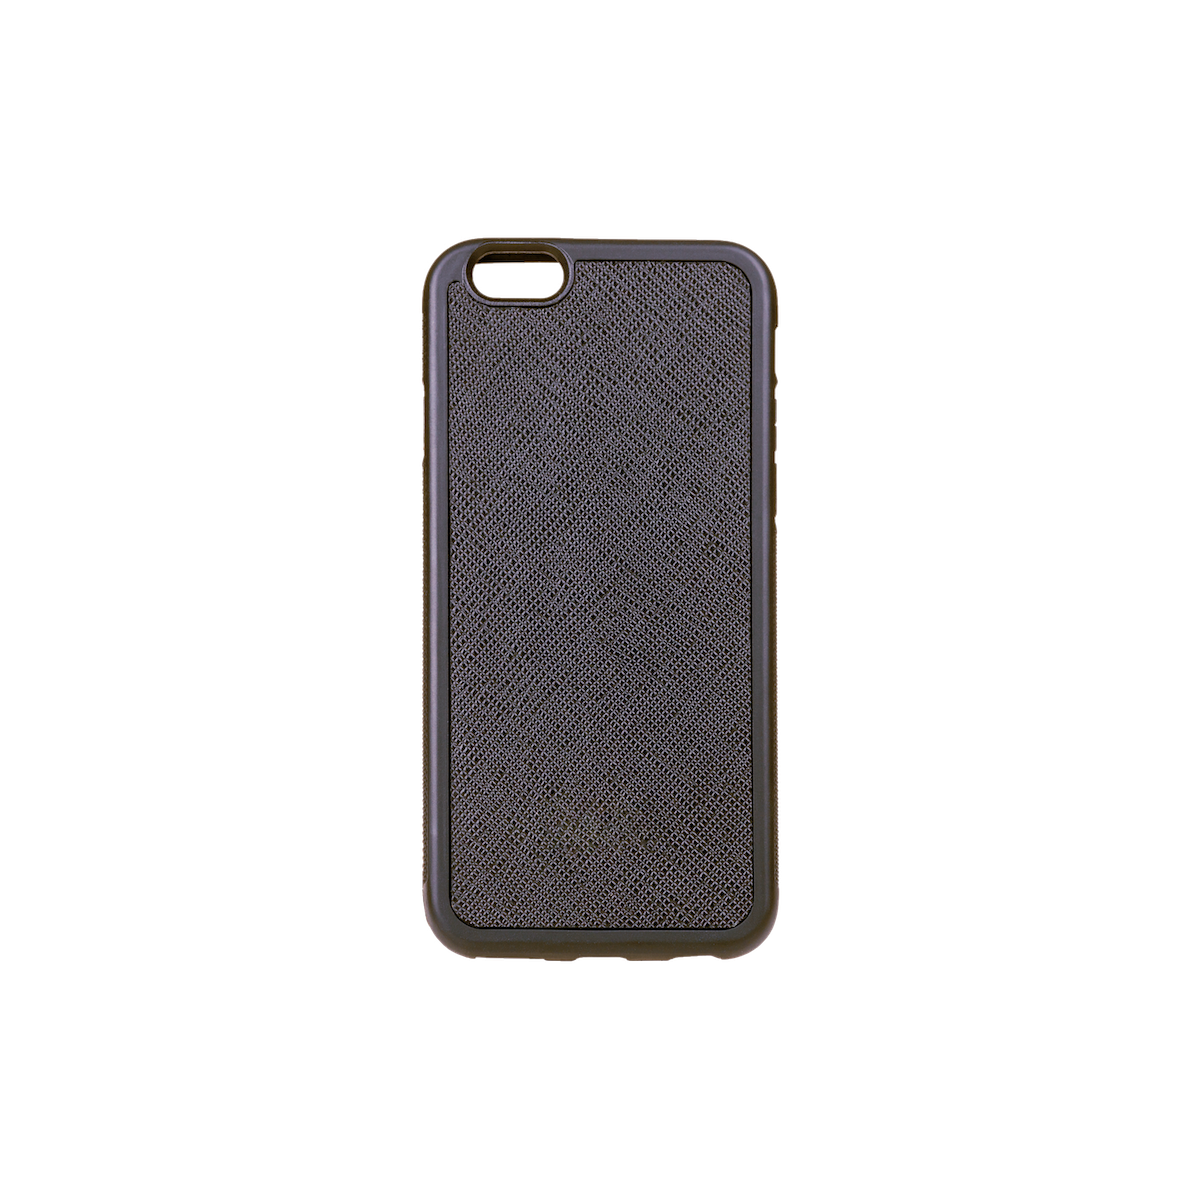 Iphone 6 Case, Saffiano Leather, MAISON JMK-VONMEL Luxe Gifts